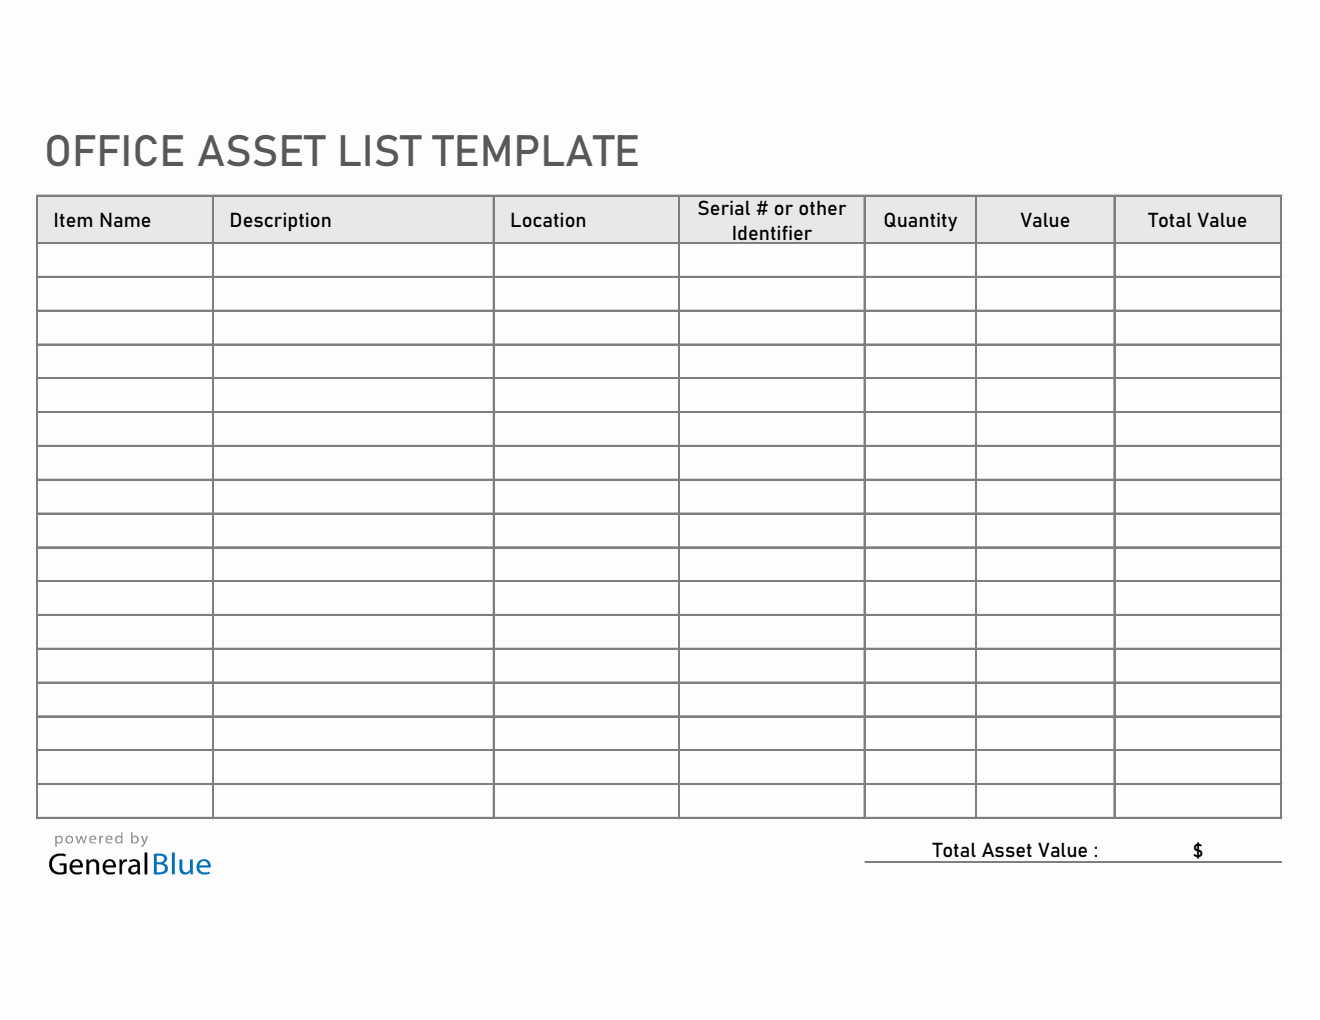 Asset Tracking Templates